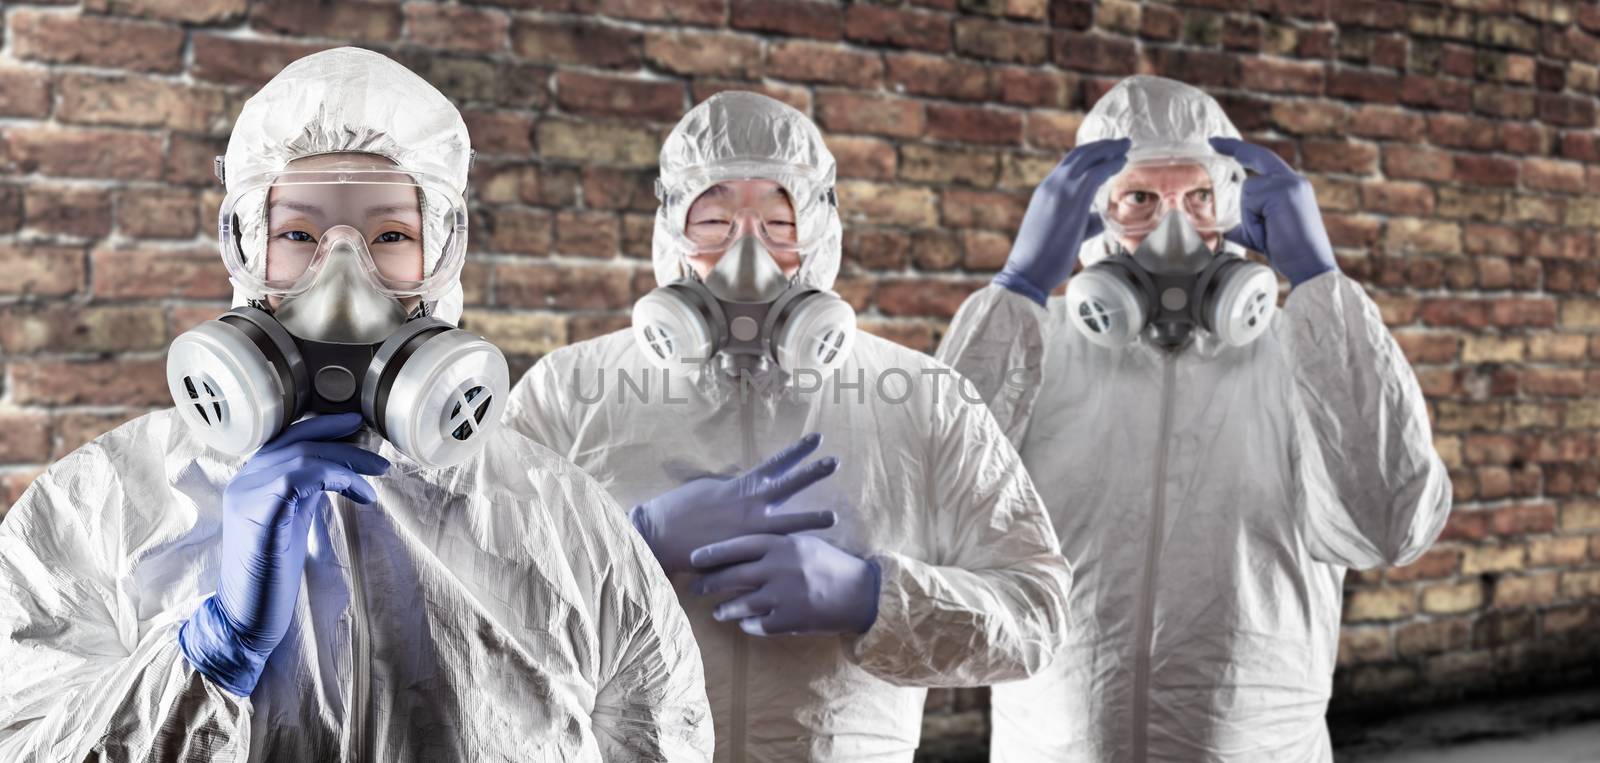 Chinese and Caucasian Woman and Men In Gas Masks, Goggles and Hazmat Suites Against Brick Background.